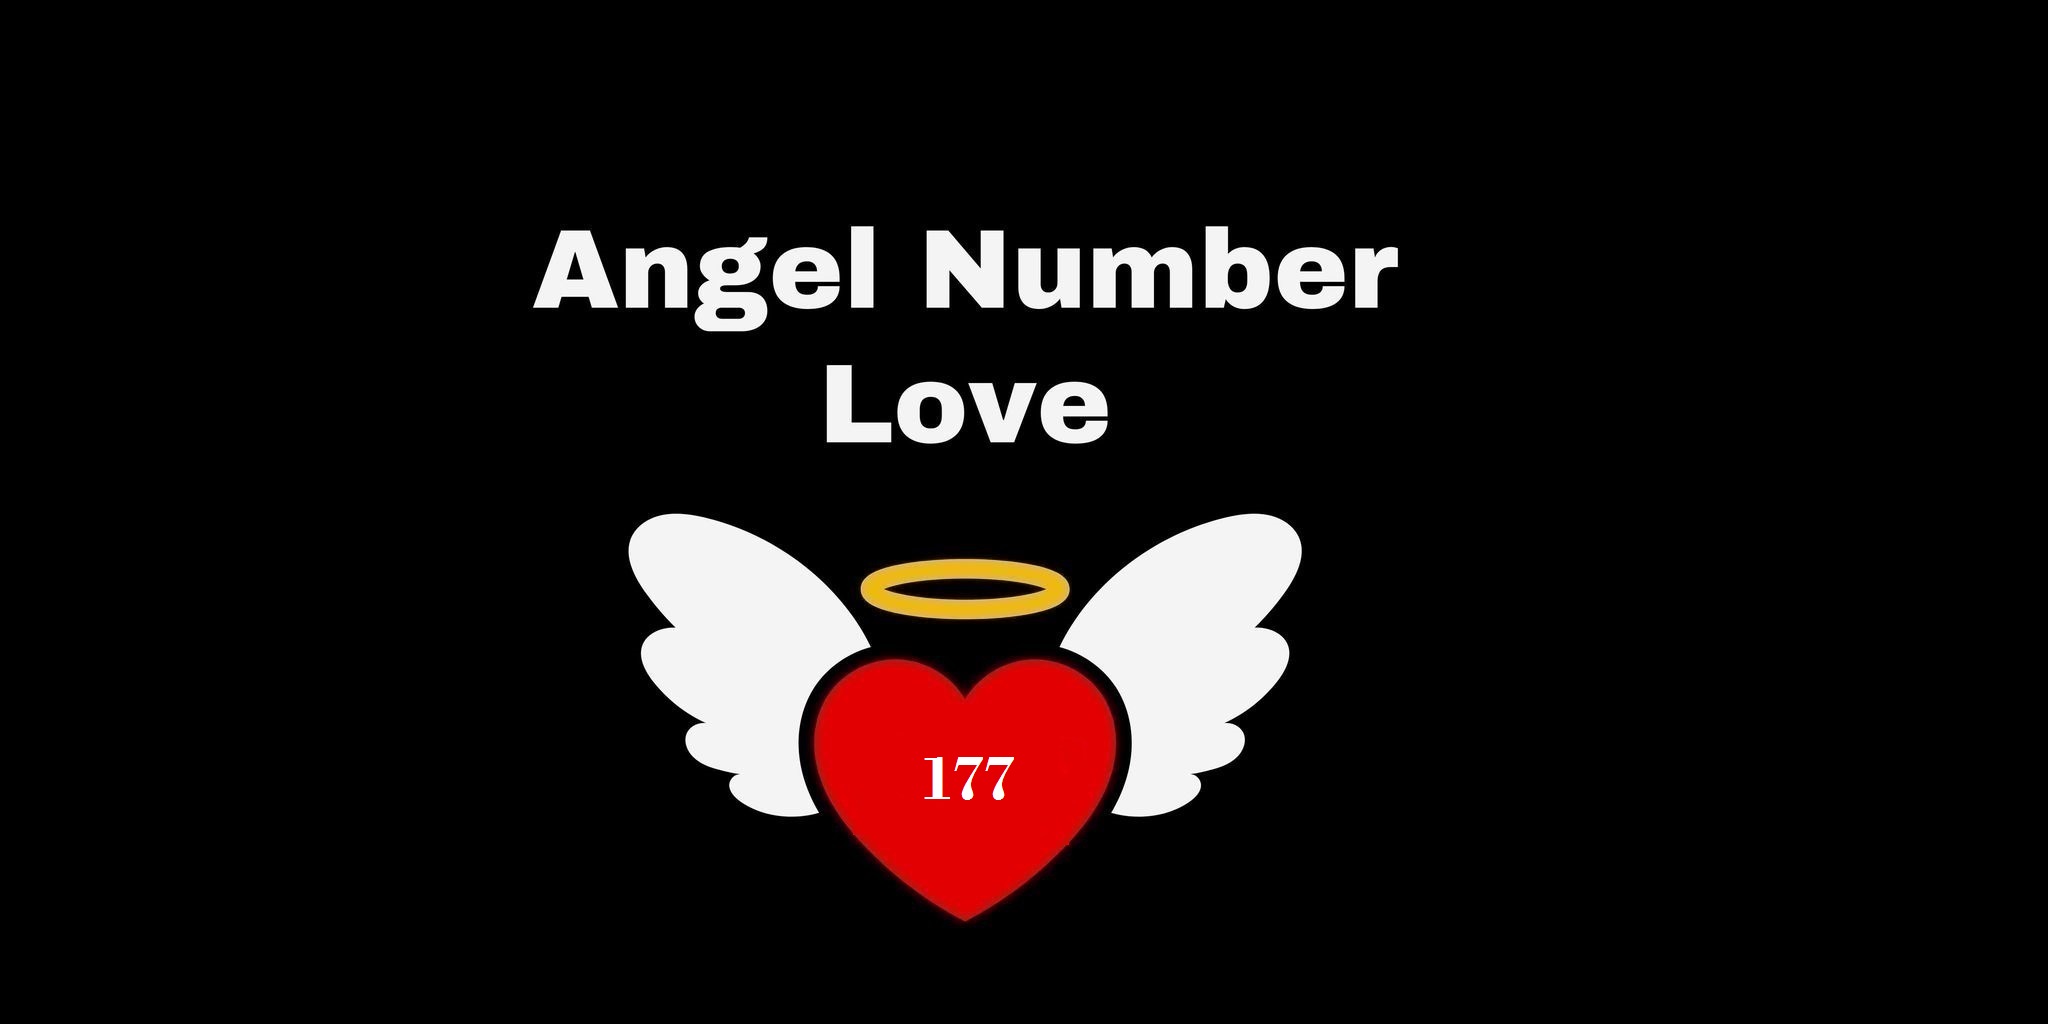 177 Angel Number Meaning In Love